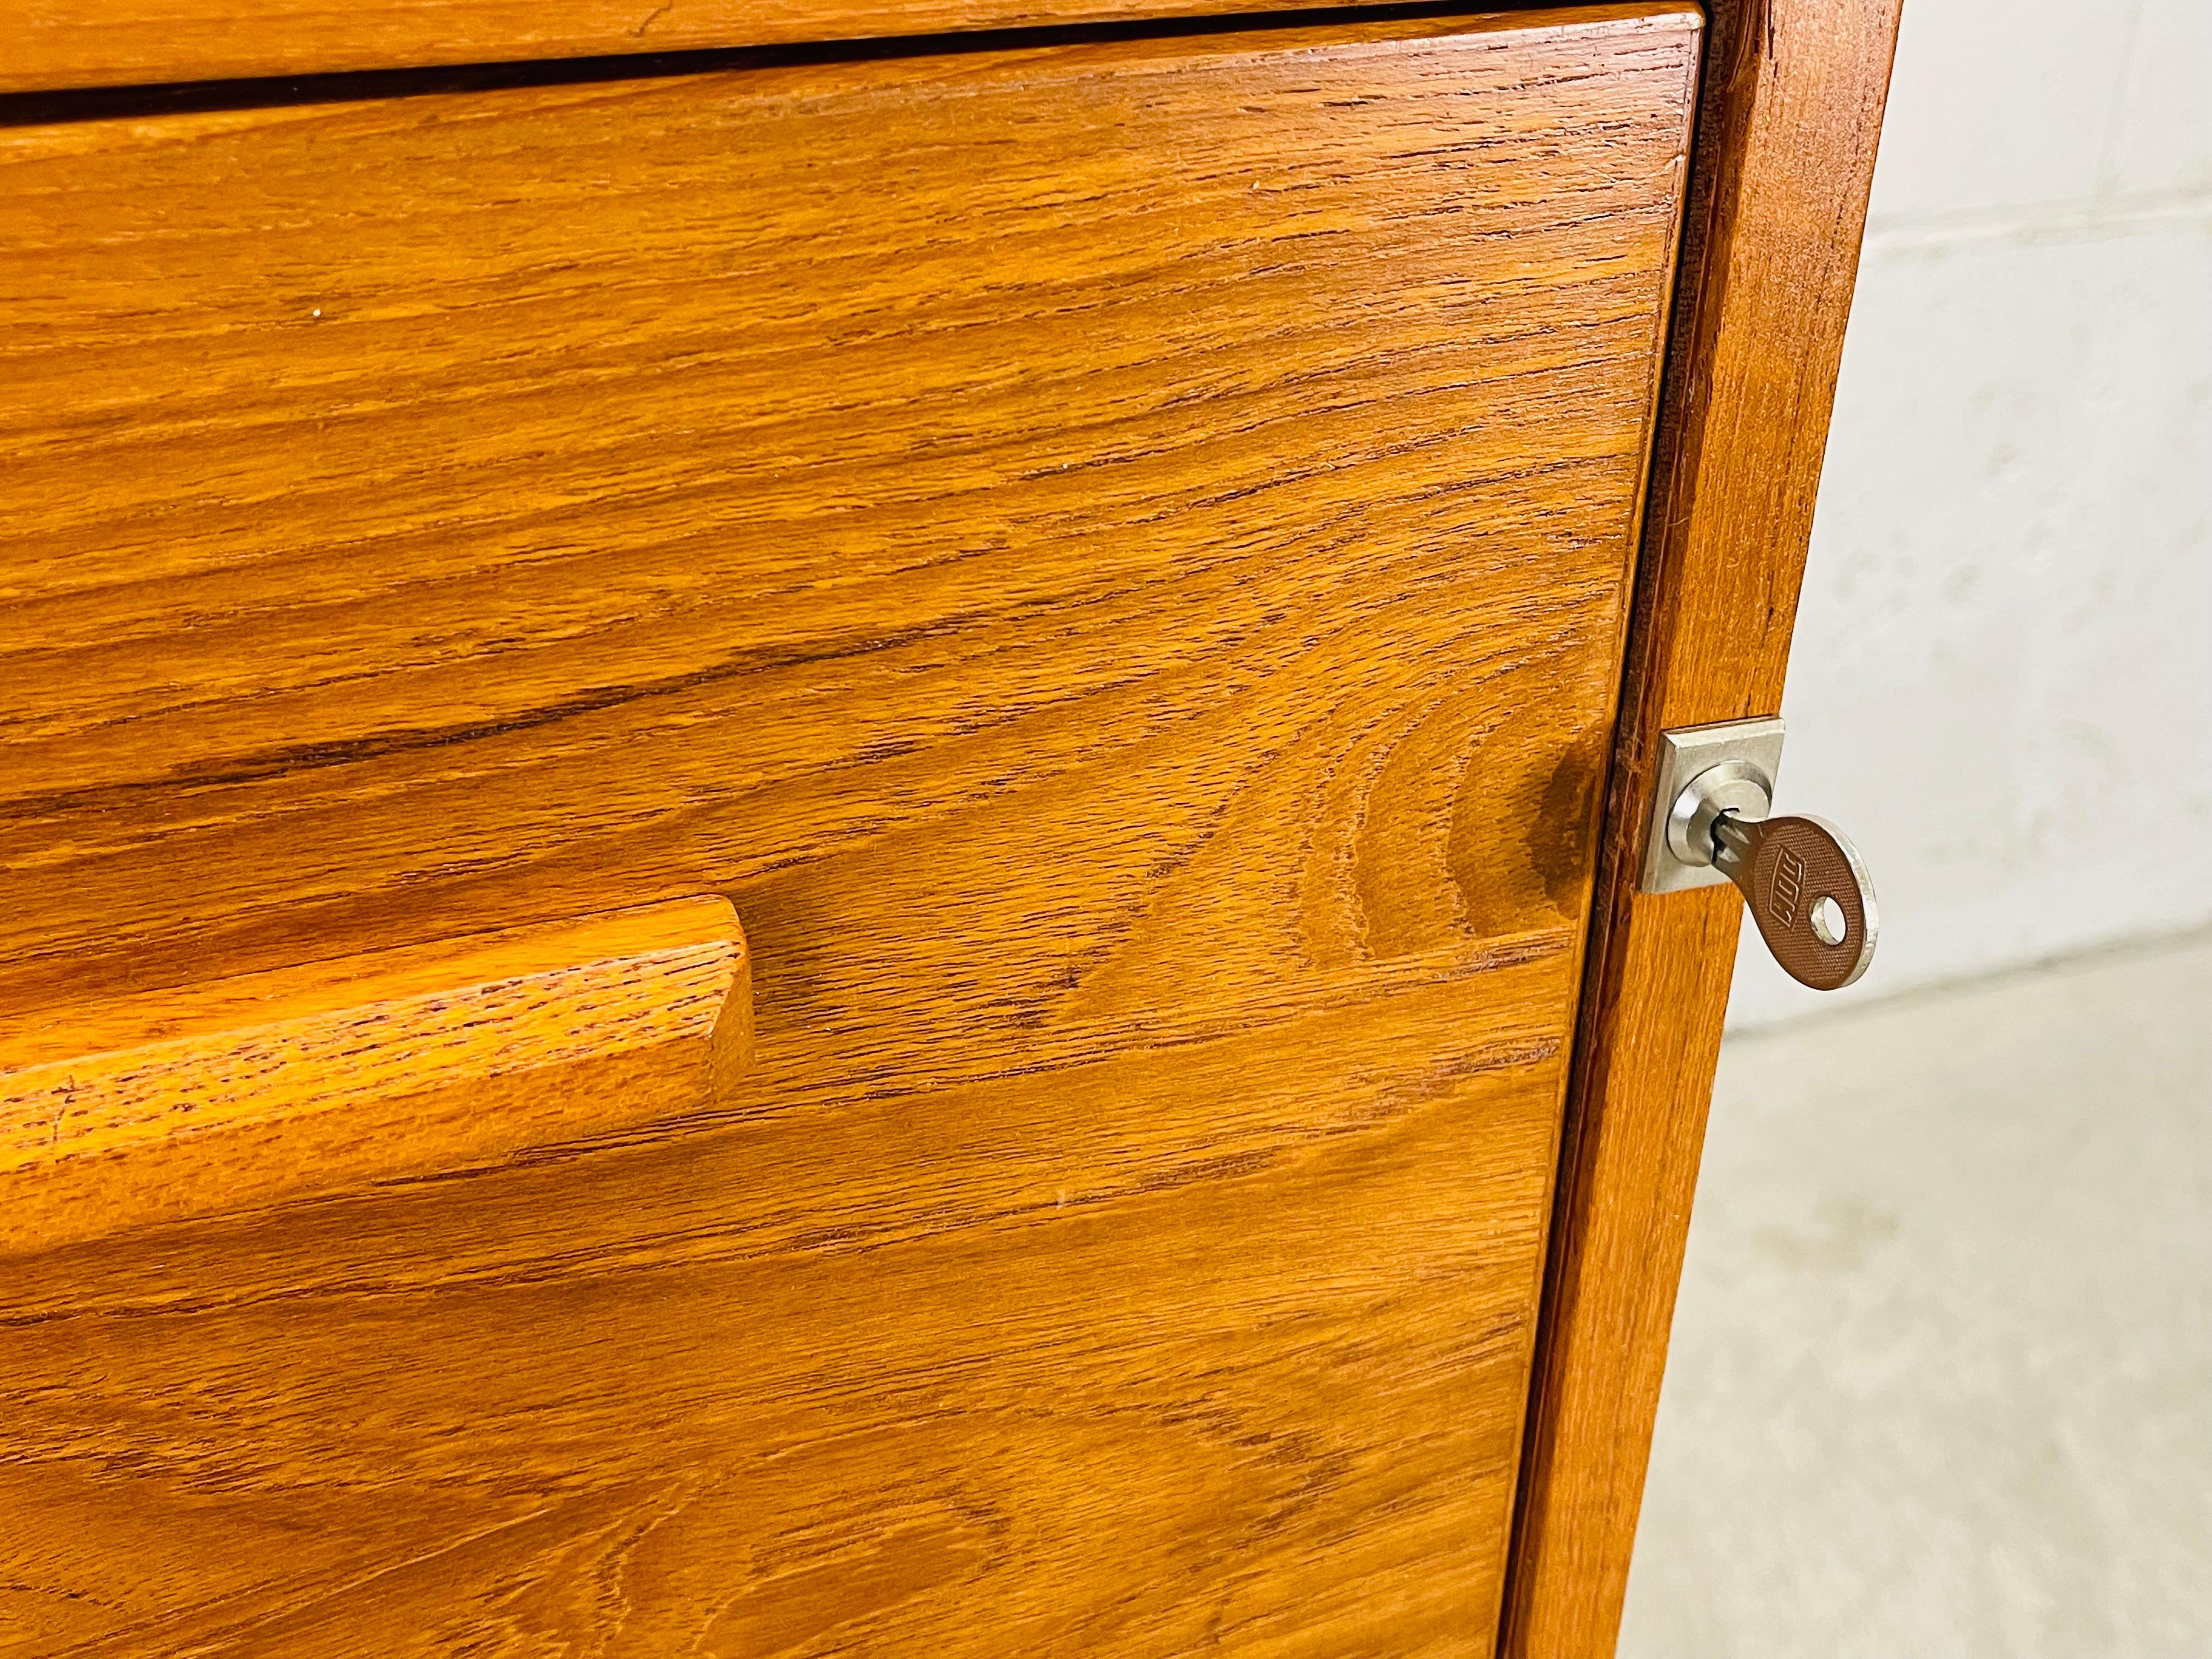 1970s Teak Wood File Cabinet In Good Condition For Sale In Amherst, NH